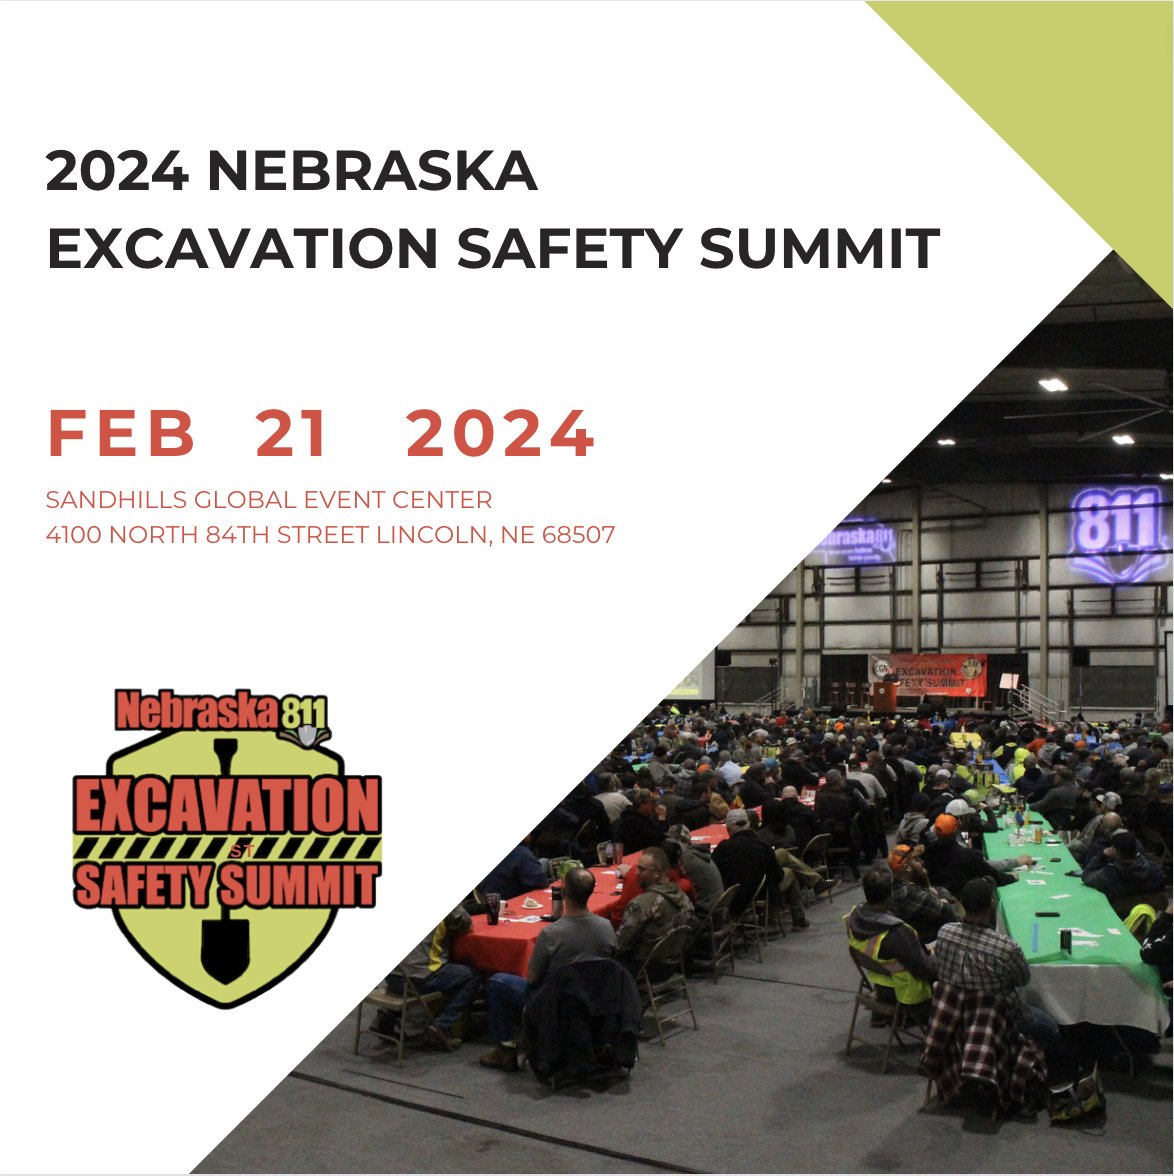 🔜 The countdown begins! Just one week until the 13th Annual NE Excavation Safety Summit on Feb 21! 🚀 Get ready to connect with industry experts, explore cutting-edge tech, and participate in exciting Rodeos. Mark your calendars and join us for this FREE event! #ExcavationSafety